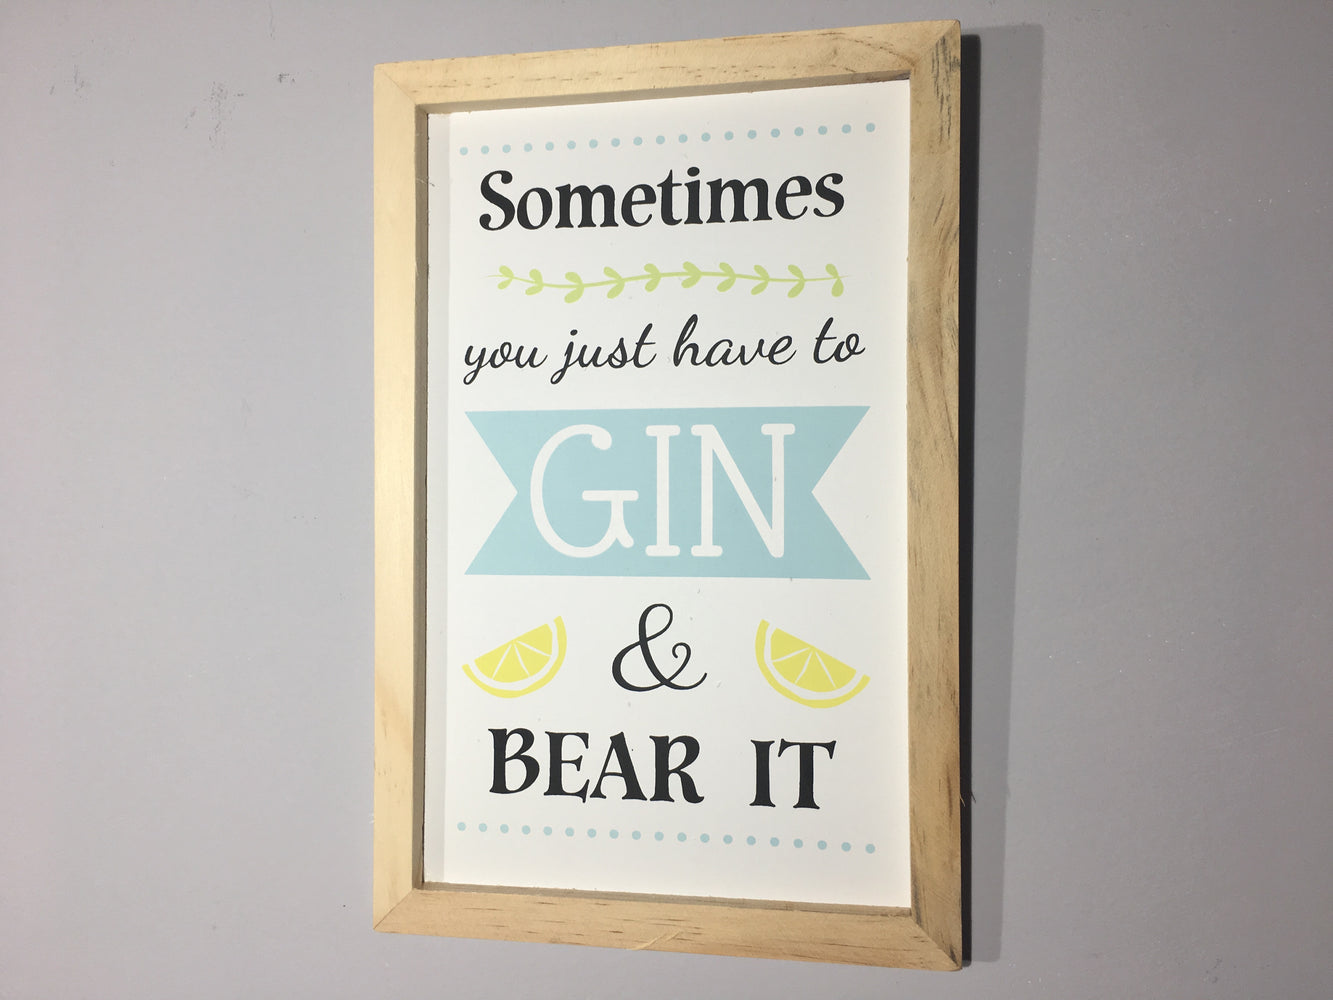 Sometimes you just have to gin & bear it - Gin Paque